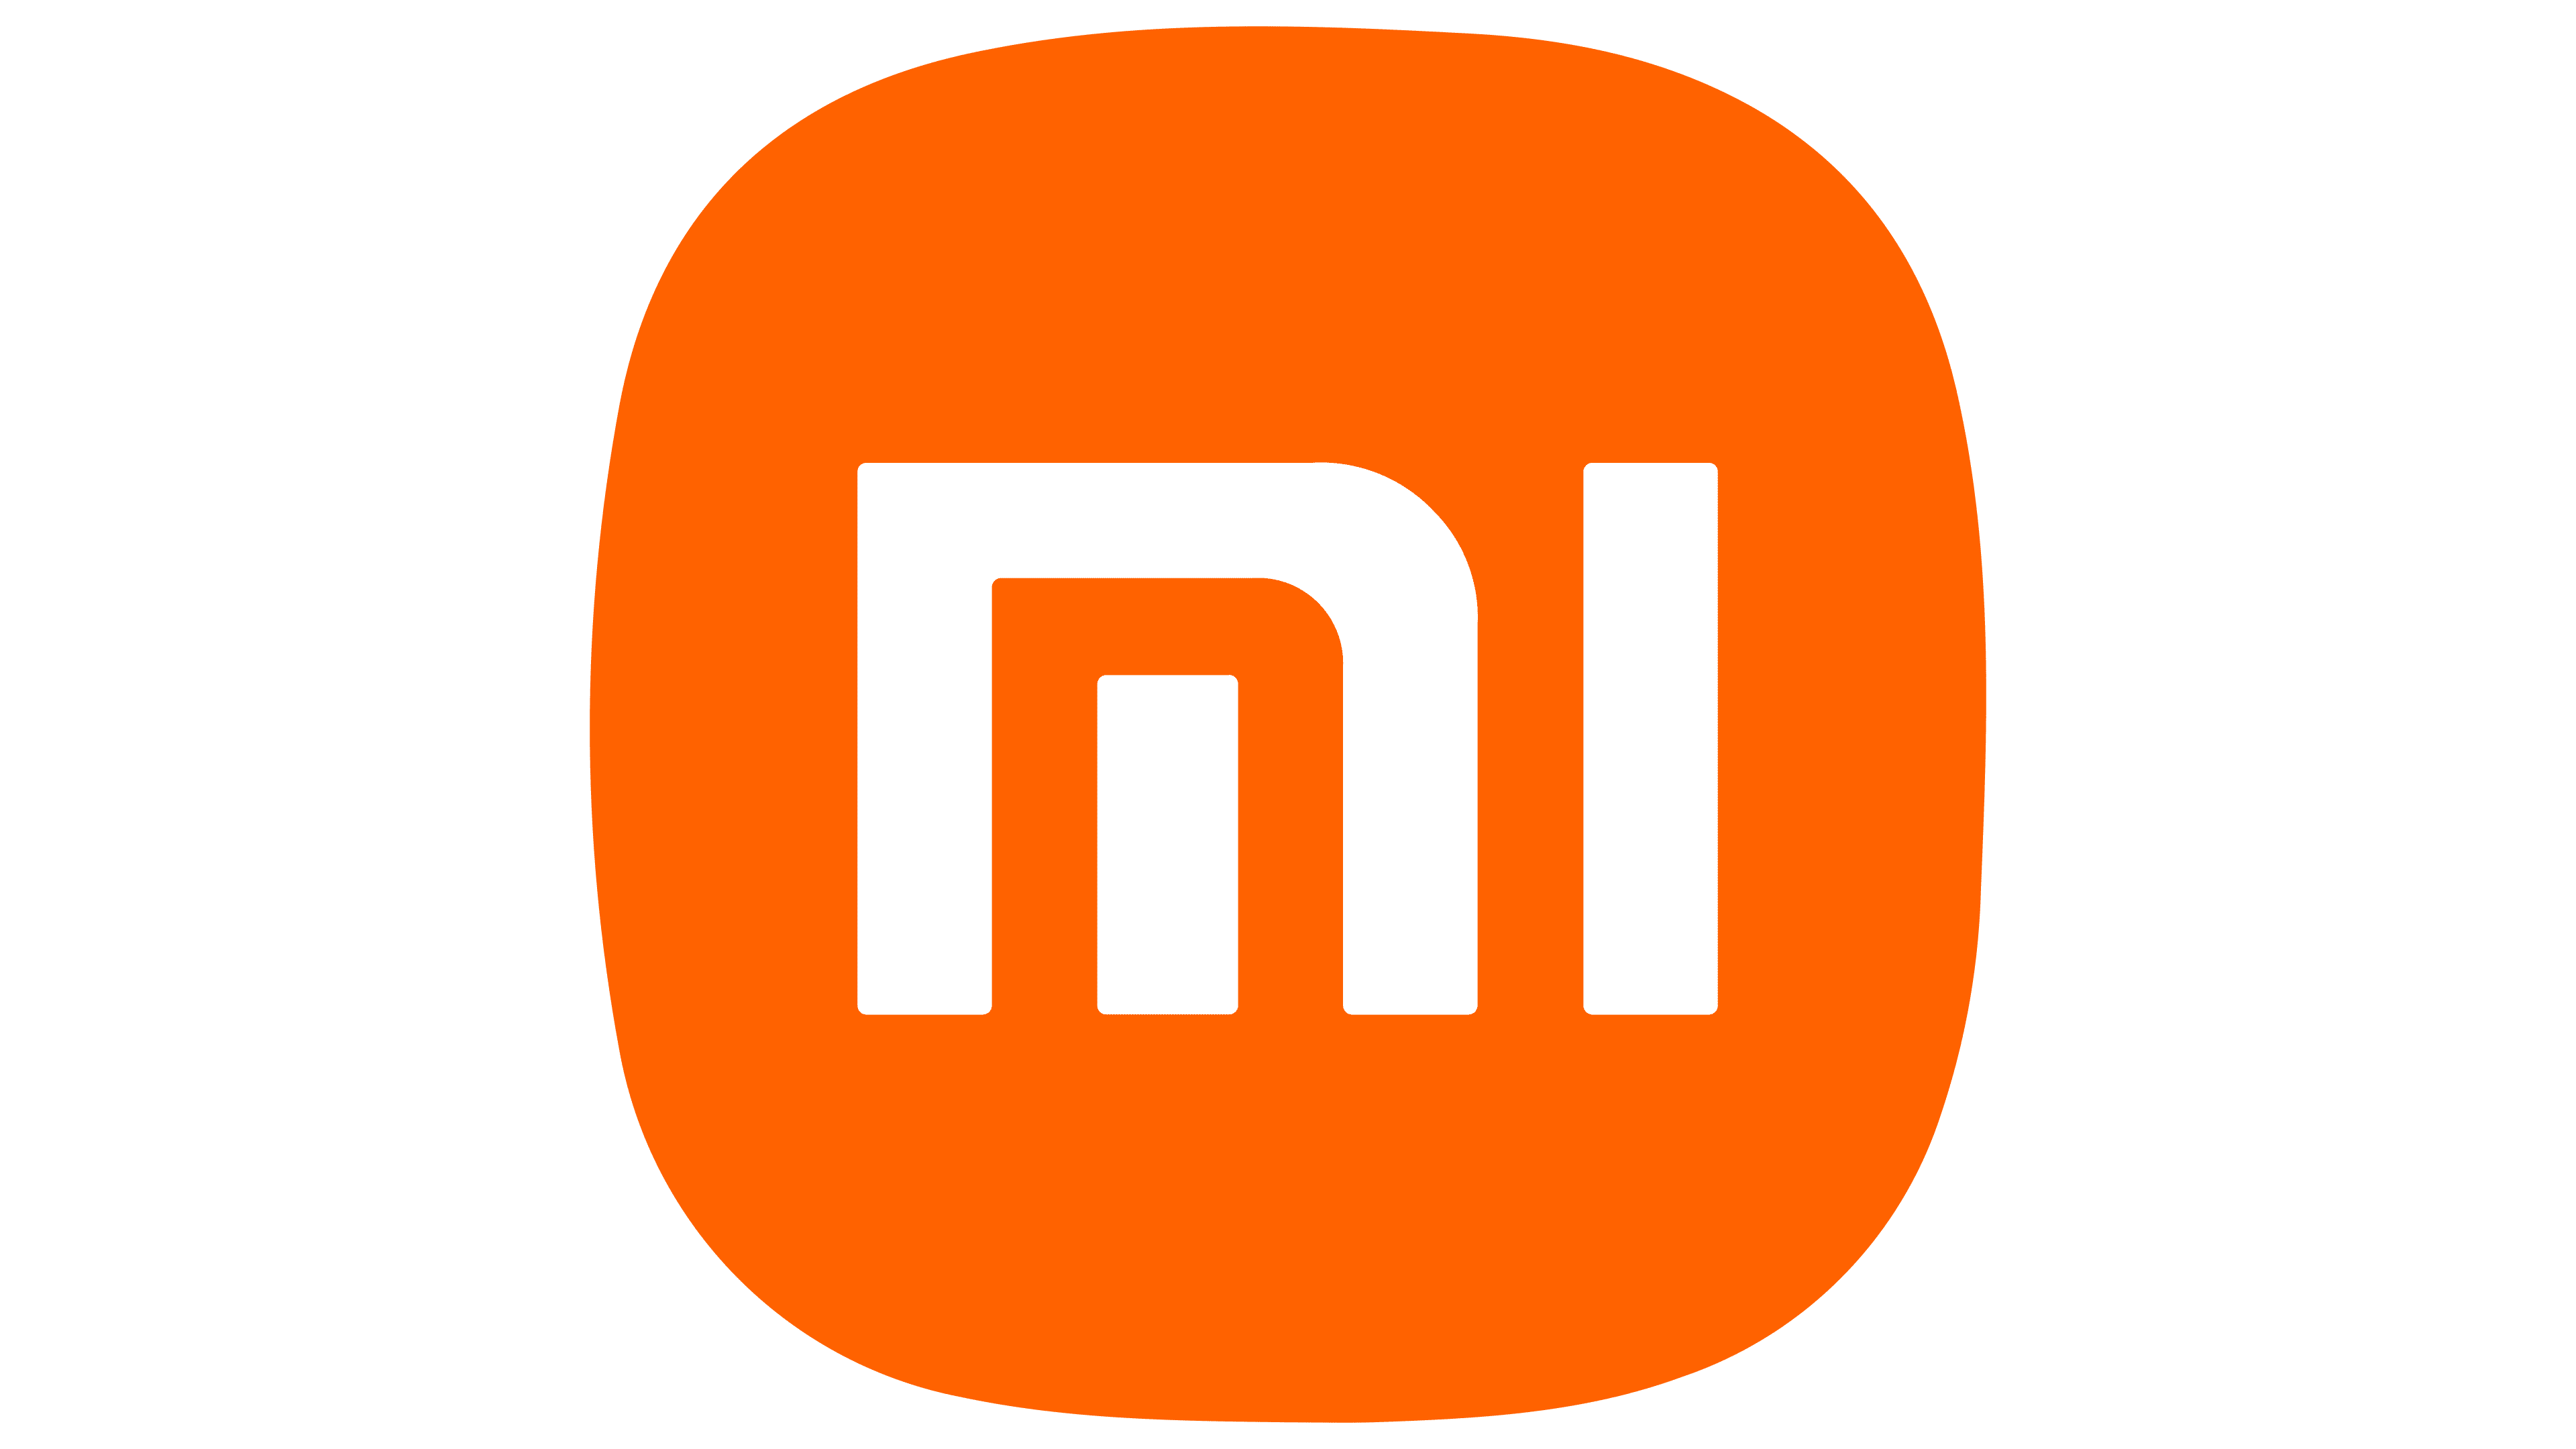 Xiaomi introduced a new logo and added corporate colors